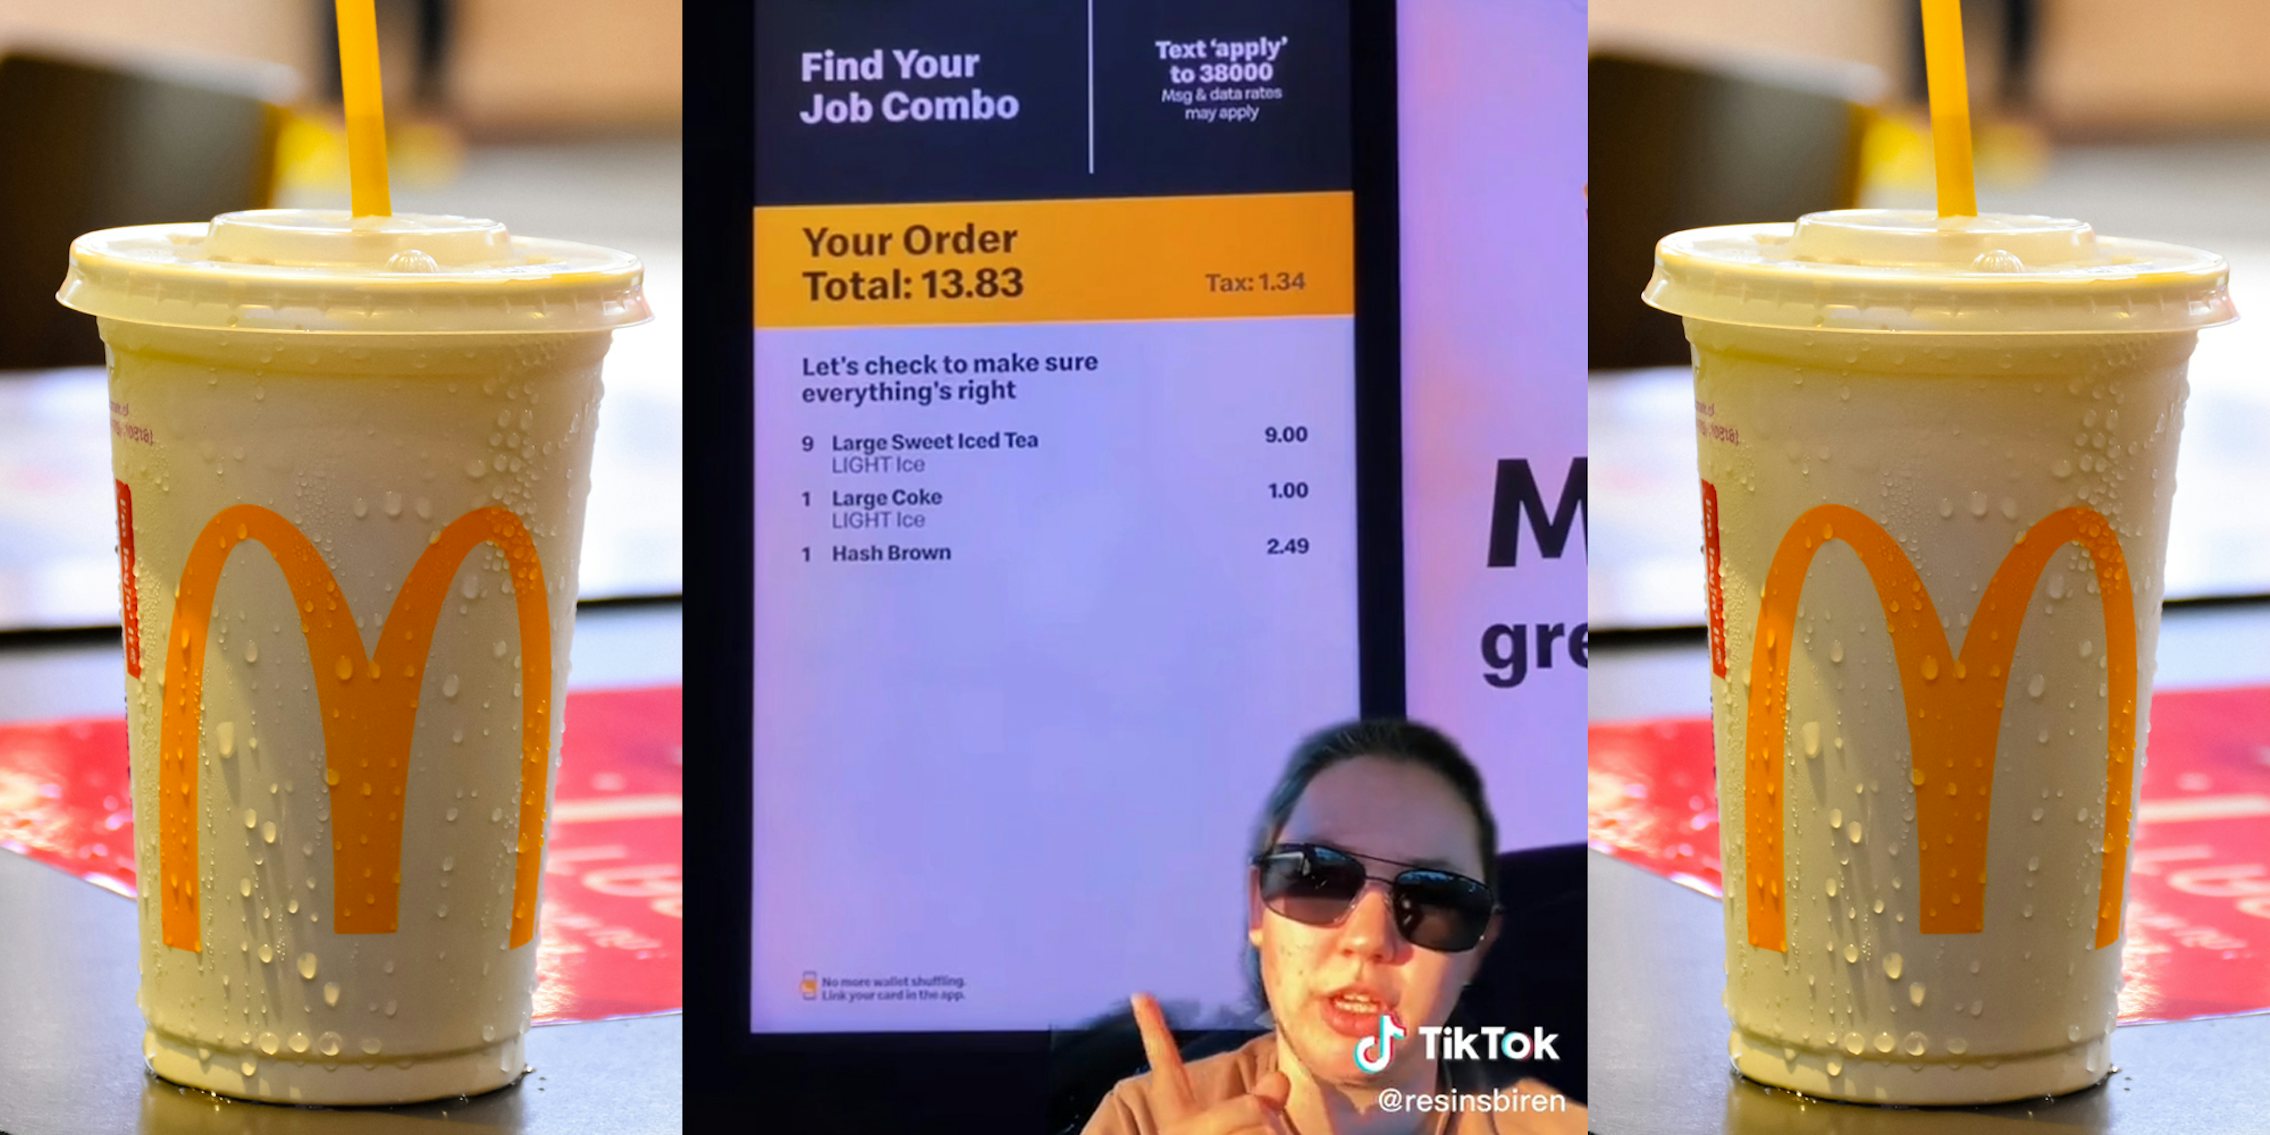 McDonald's New AI Ordering System Isn't Working as Expected